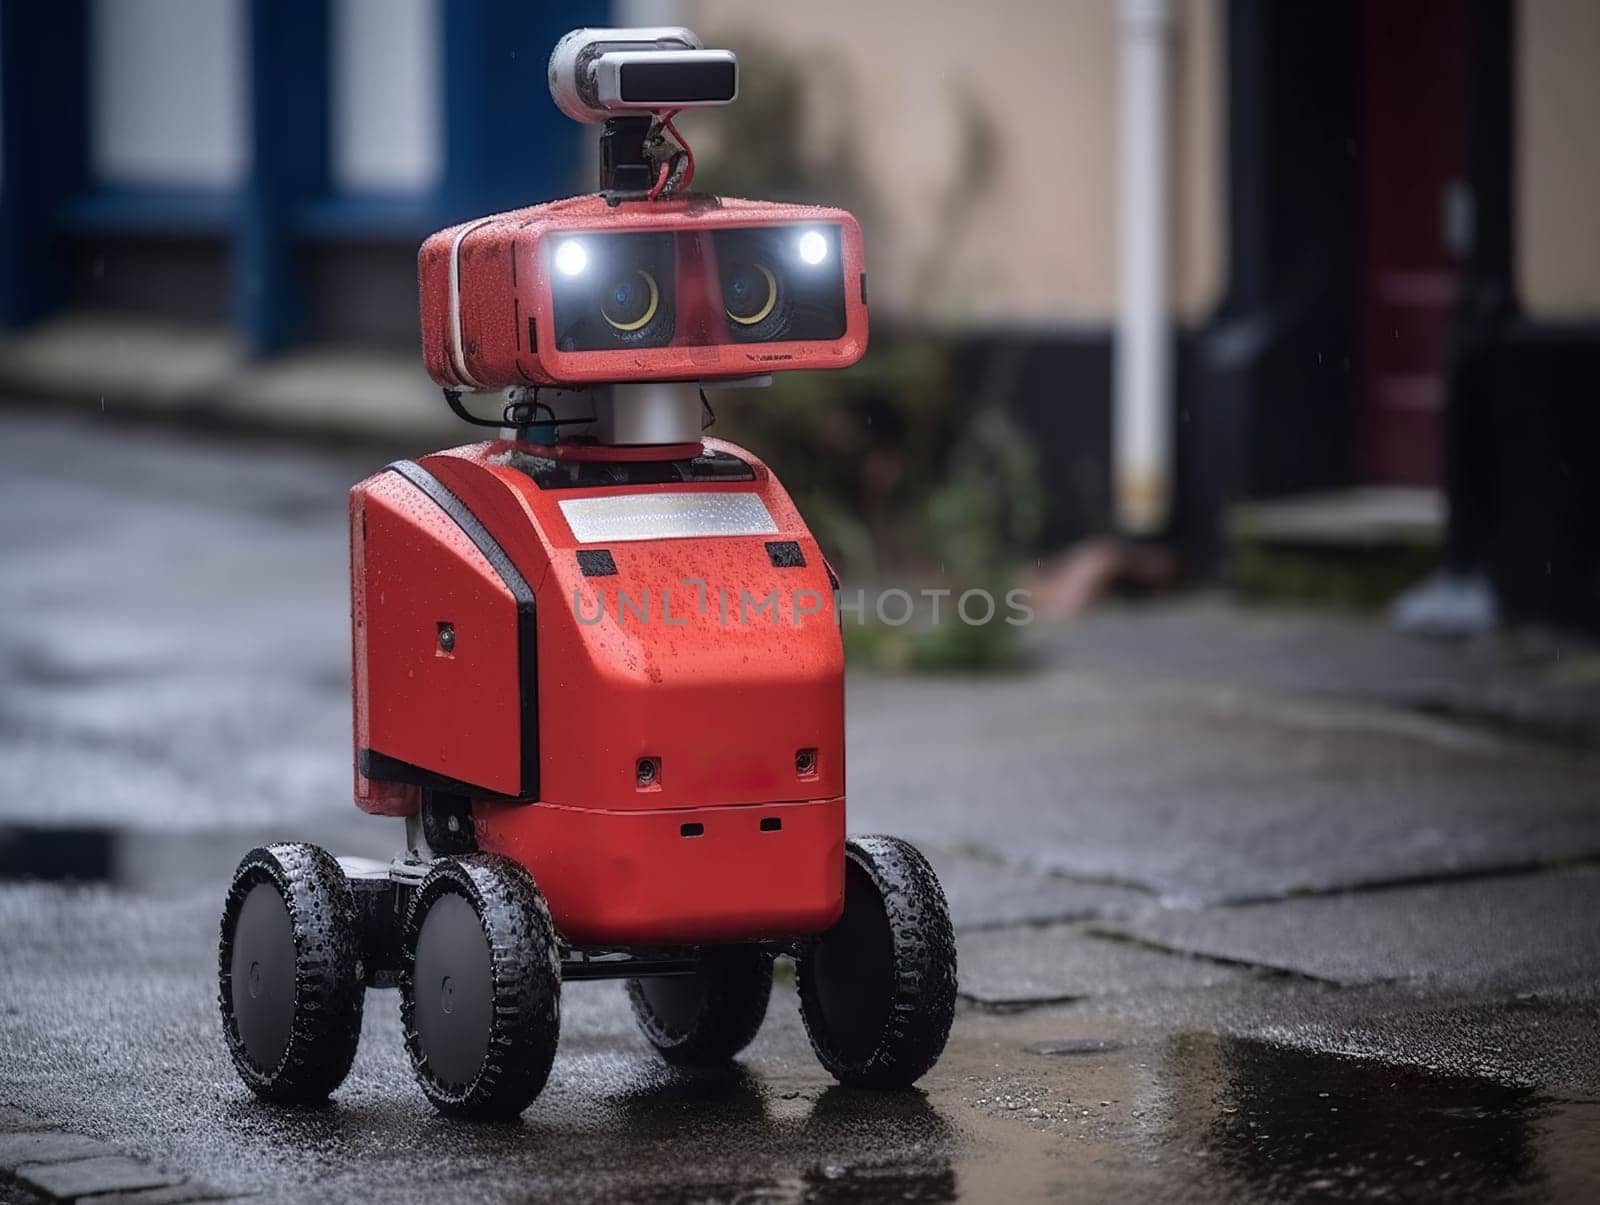 Old Fashioned Android Robot On Wheels On A City Road by tan4ikk1